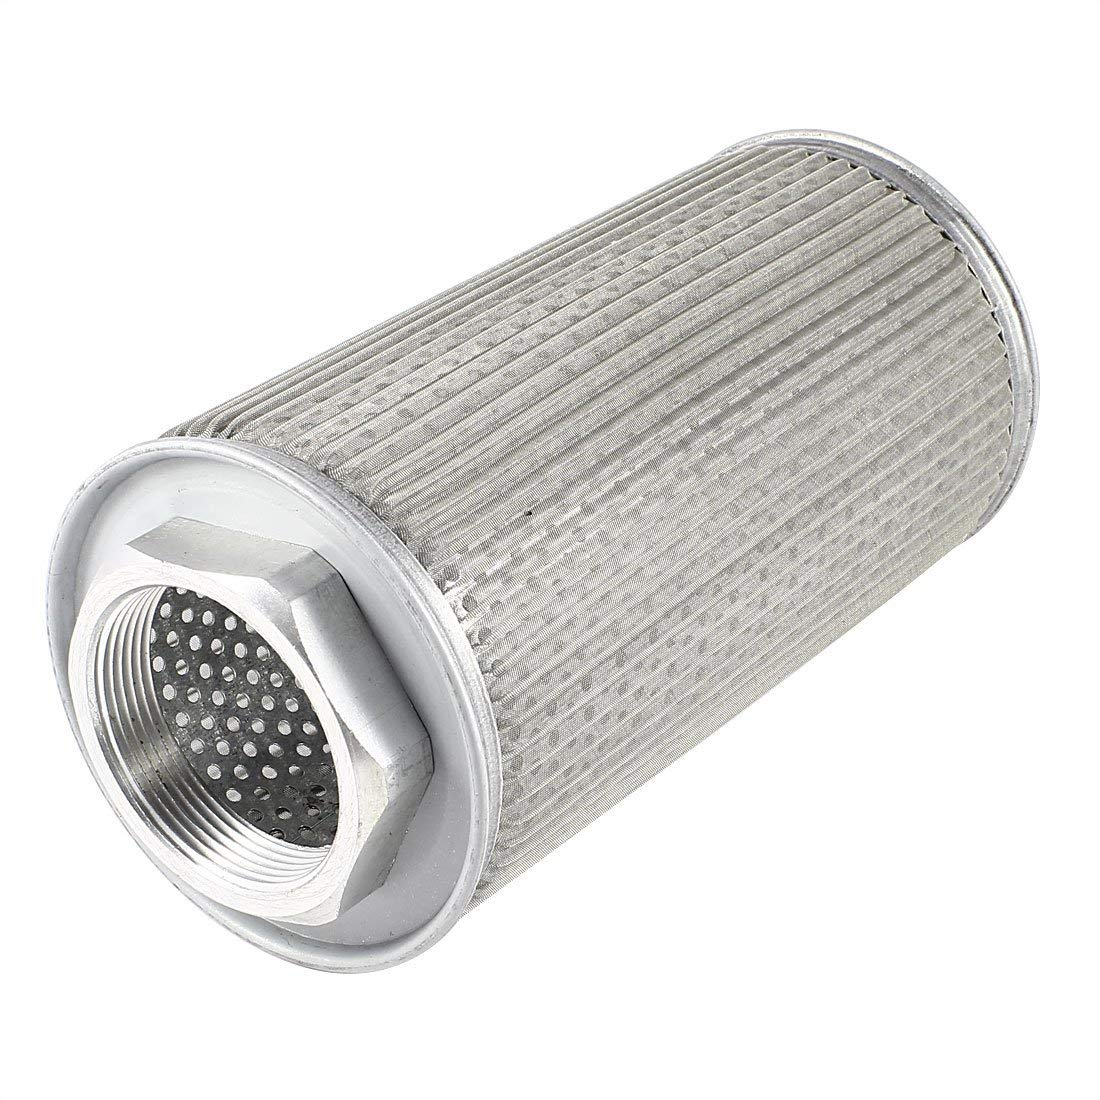 Suction Filter-MF Suction Filter